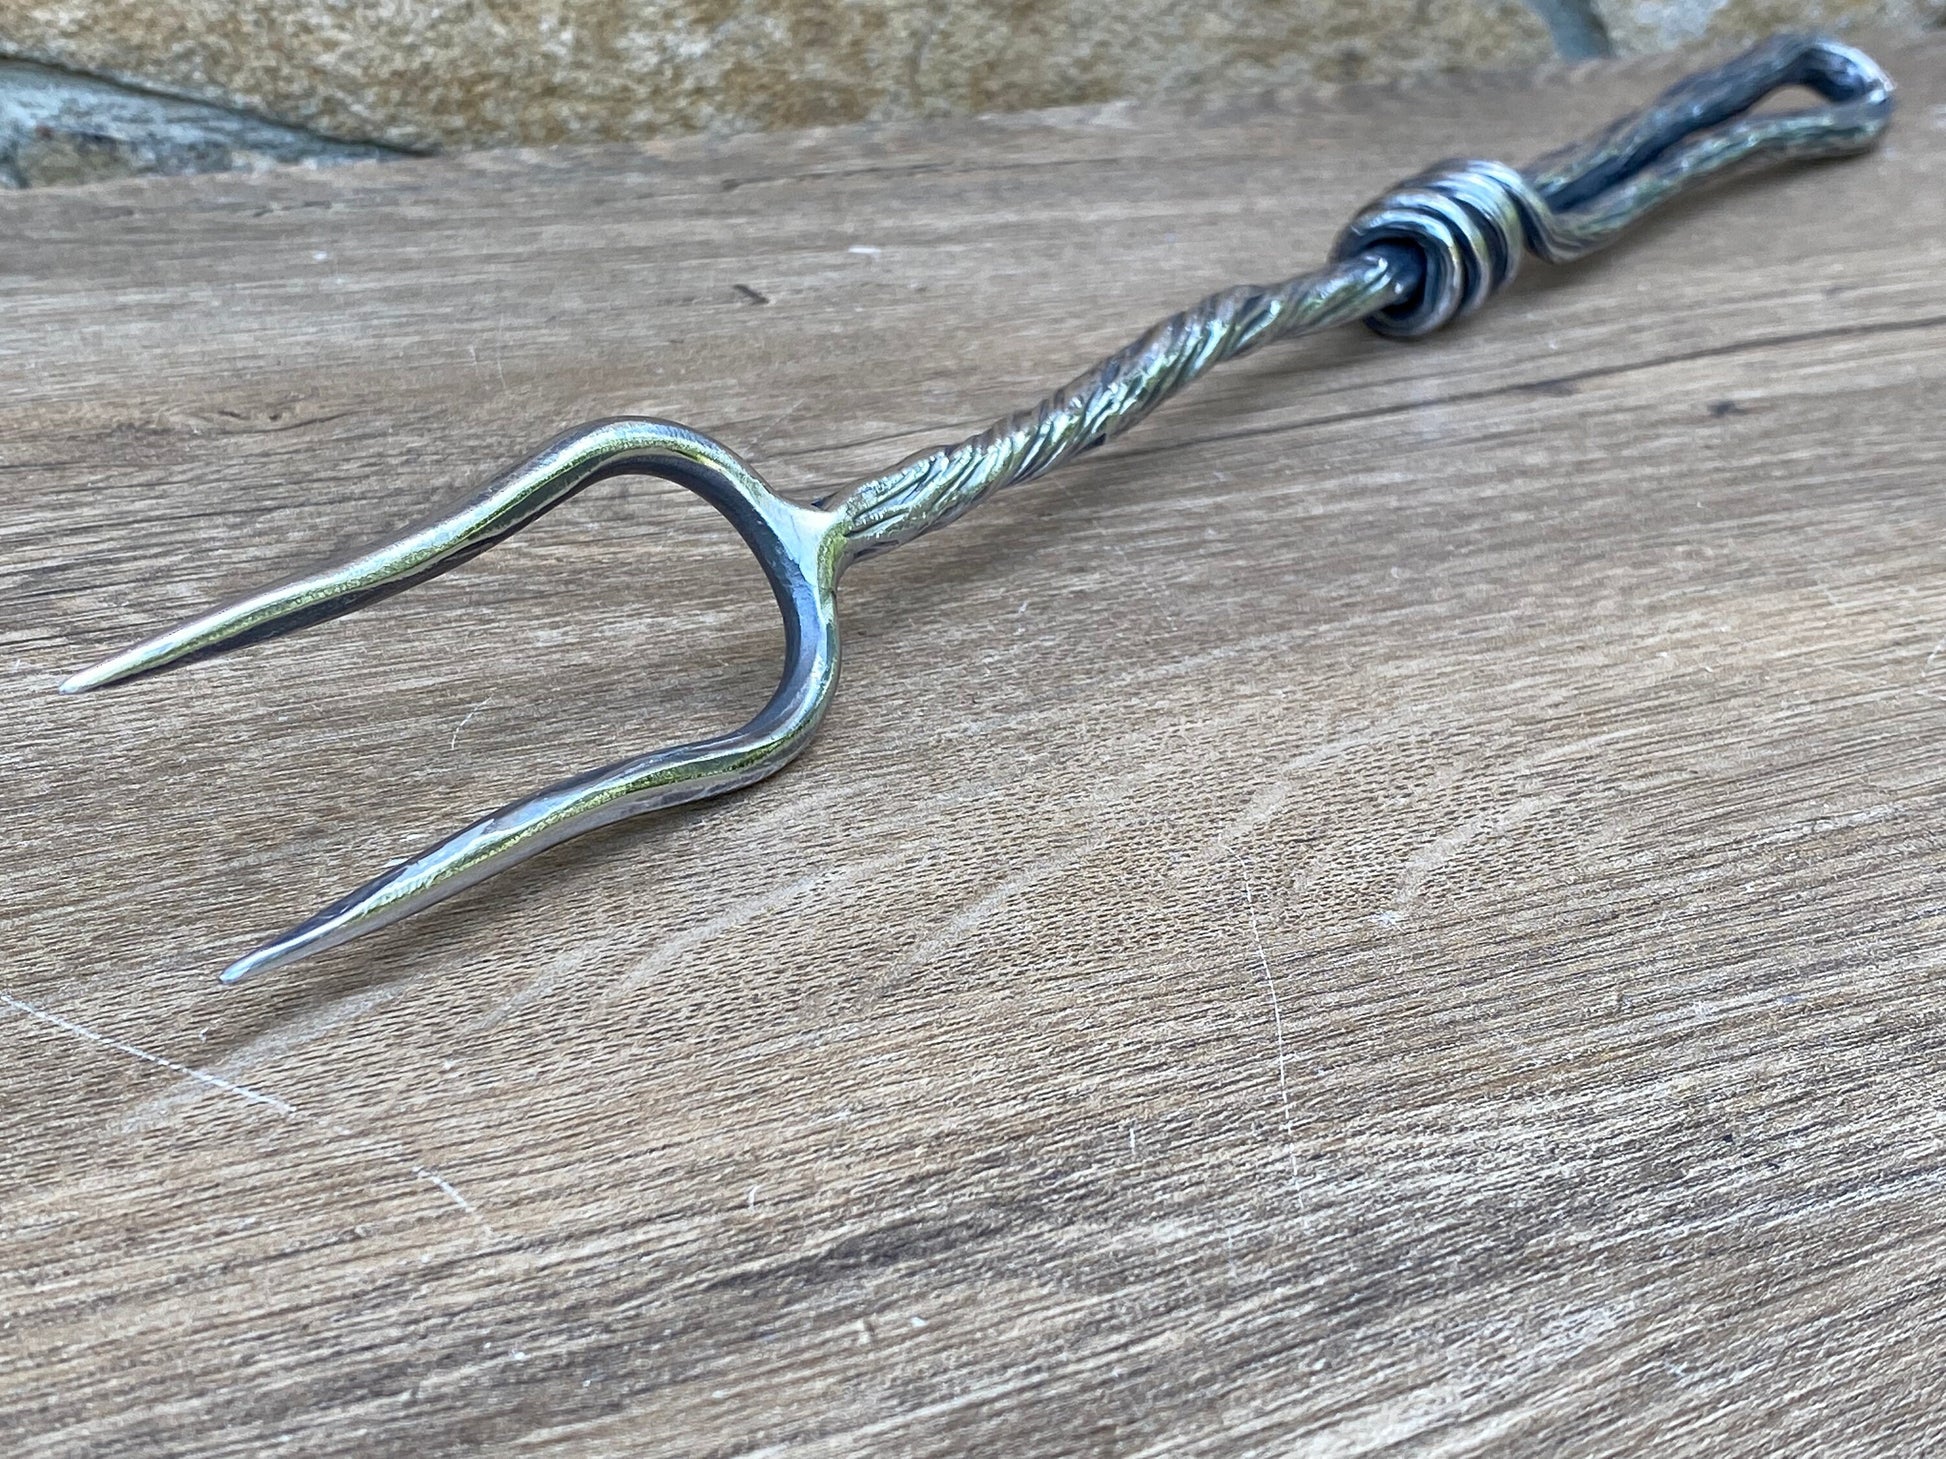 Stainless steel fork, BBQ fork, grilling gift, medieval fork, steel anniversary, medieval cutlery, 11th anniversary gift, steel gift, BBQ